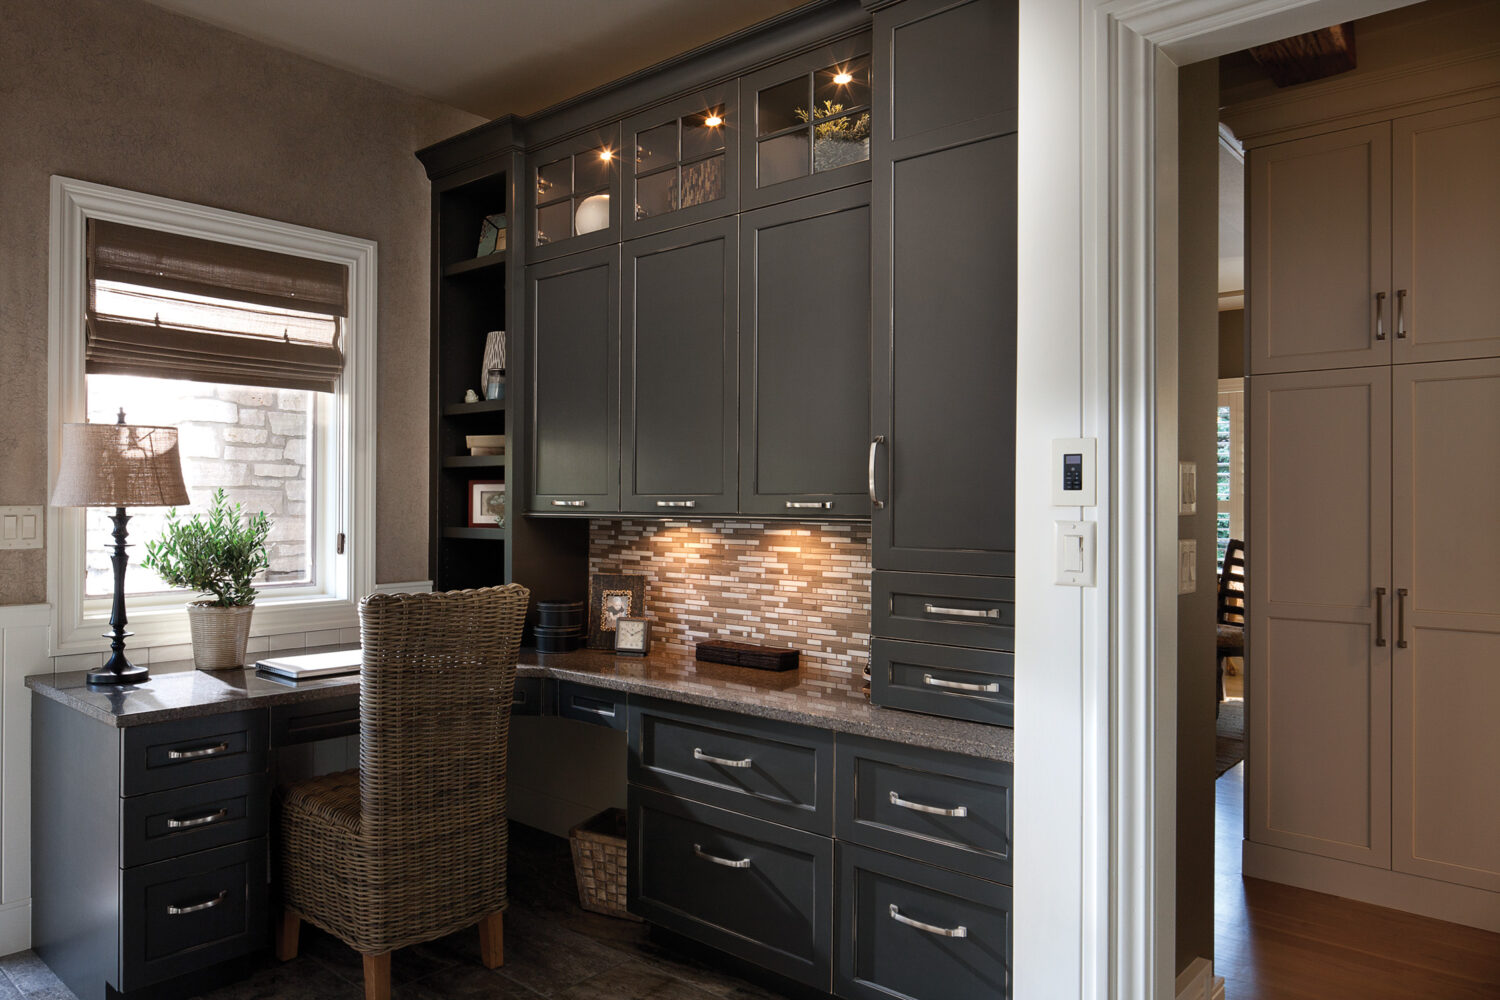 Dura Supreme Cabinetry finished in Graphite paint w/Shadow Glaze on Arcadia door style, Design by Studio M Kitchen & Bath, Plymouth, MN.